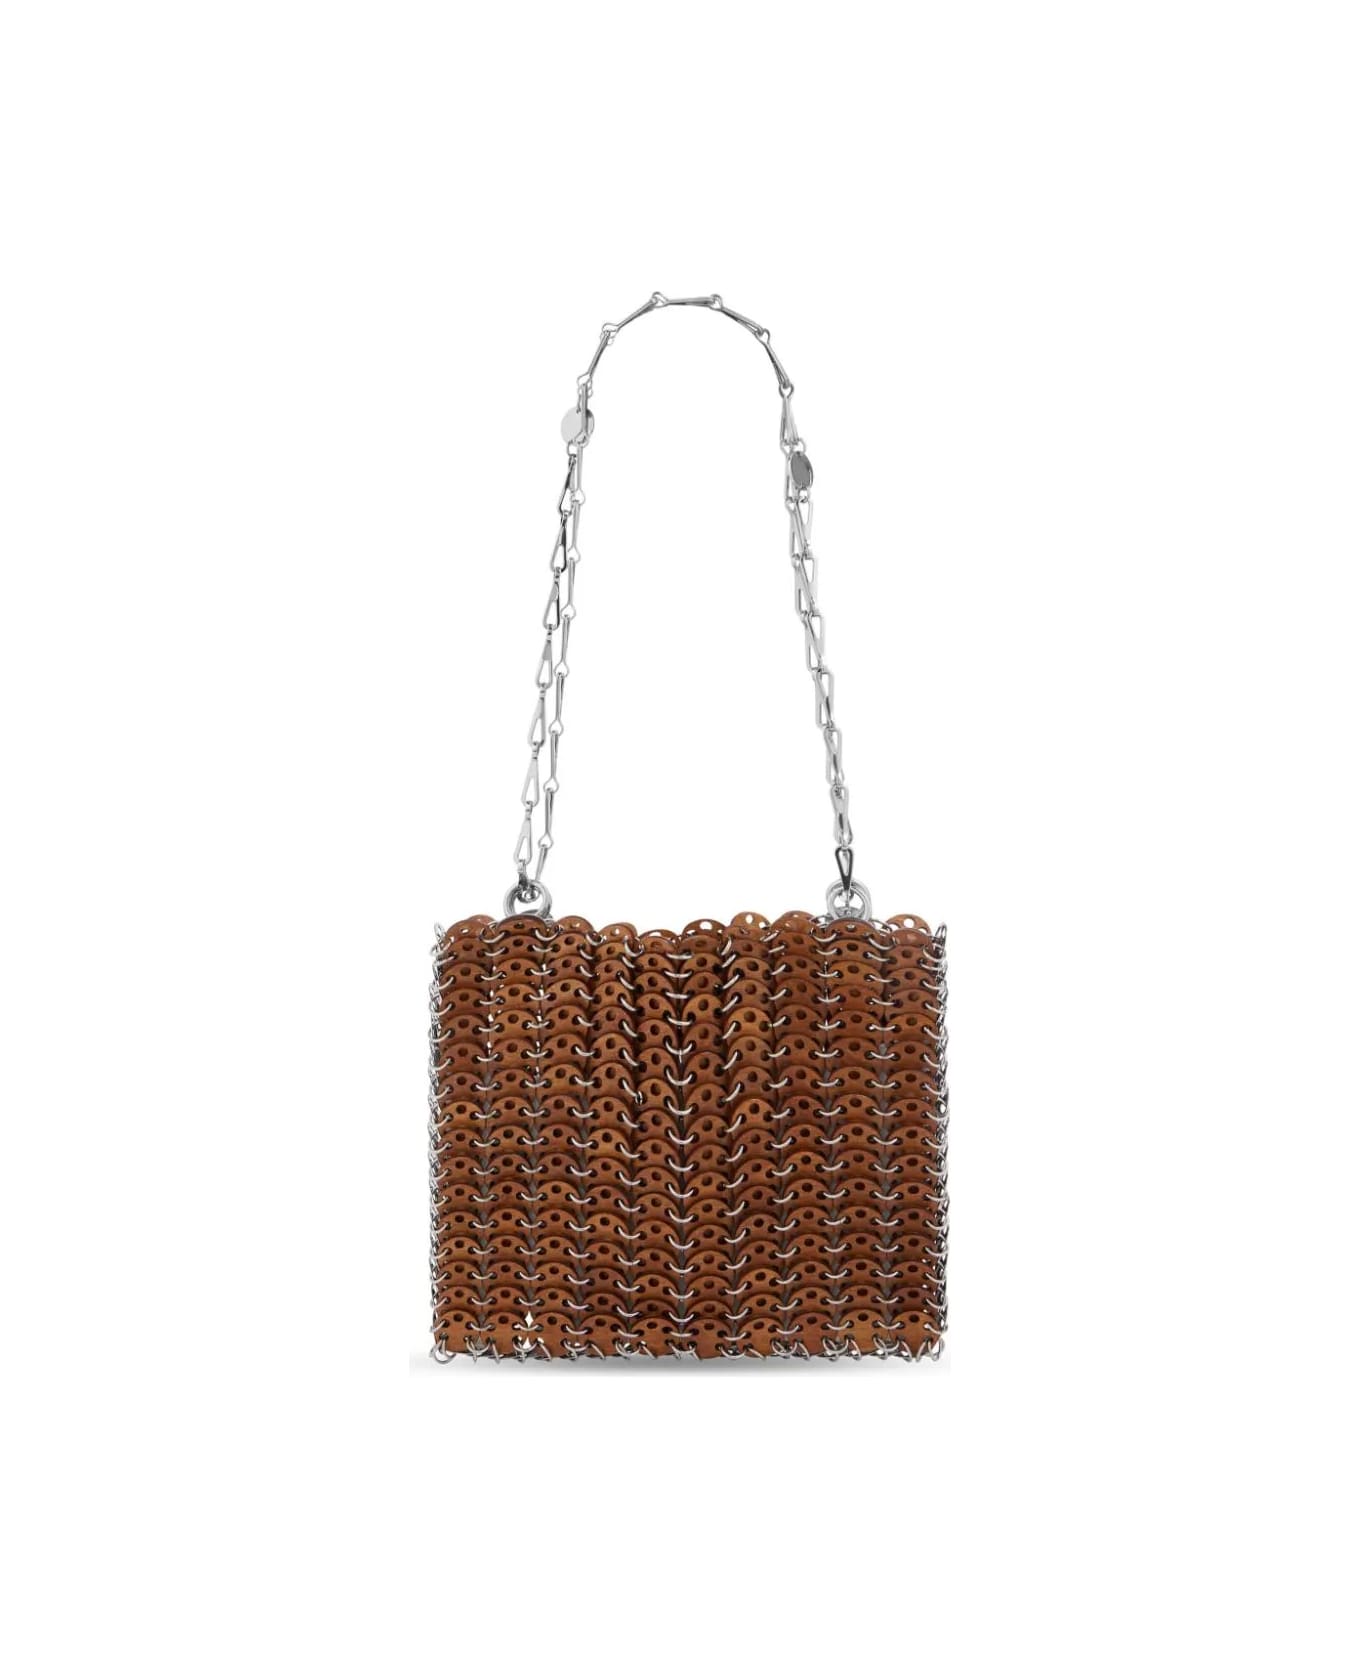 Paco Rabanne Iconic 1969 Bag In Brown Wood - Brown バッグ